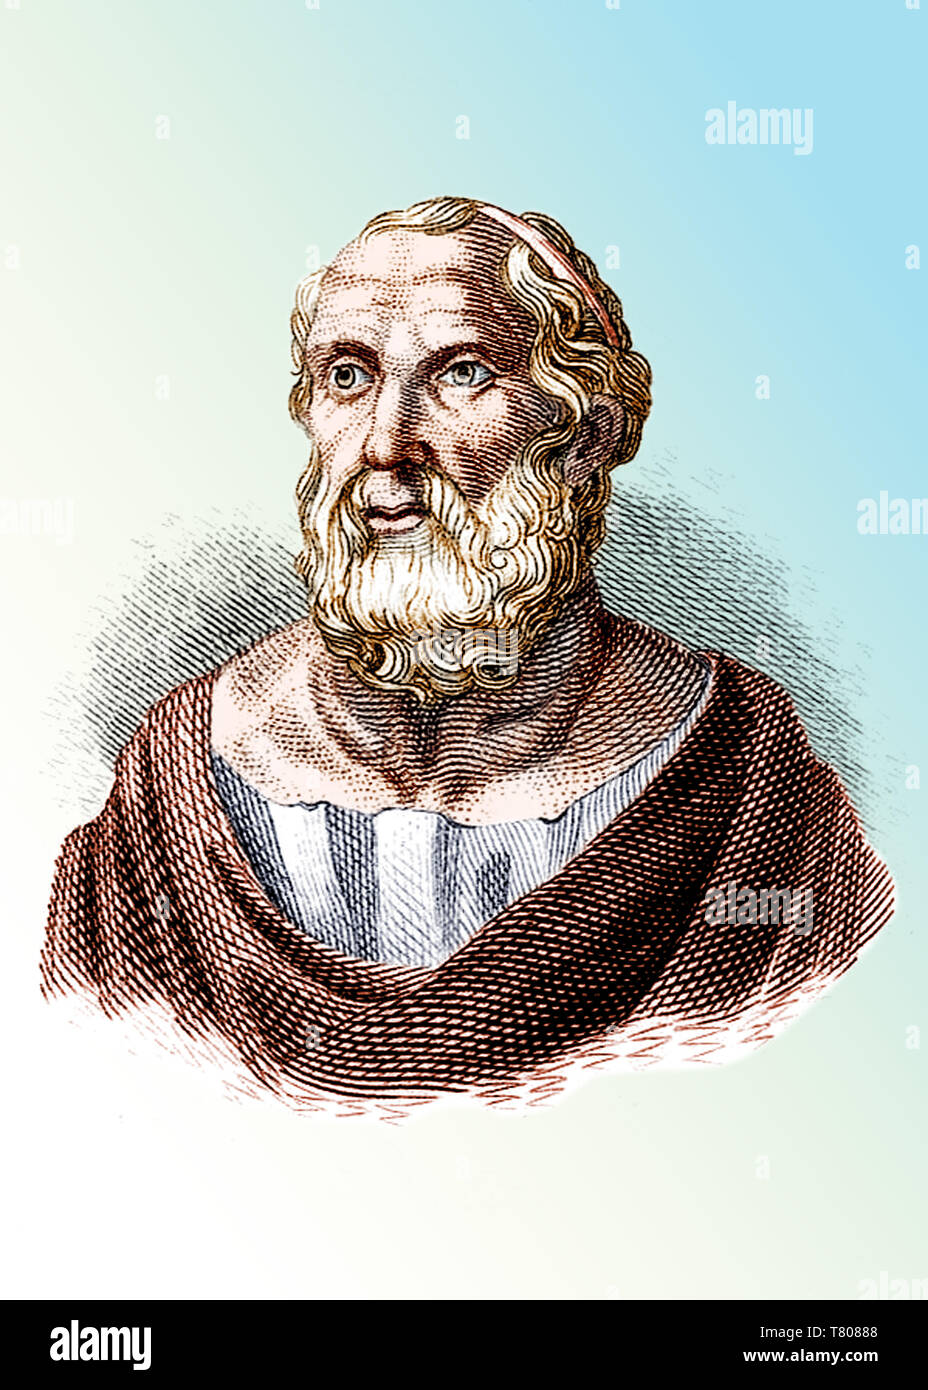 PLATO: HIS LIFE, WORKS AND ACADEMY | Facts and Details